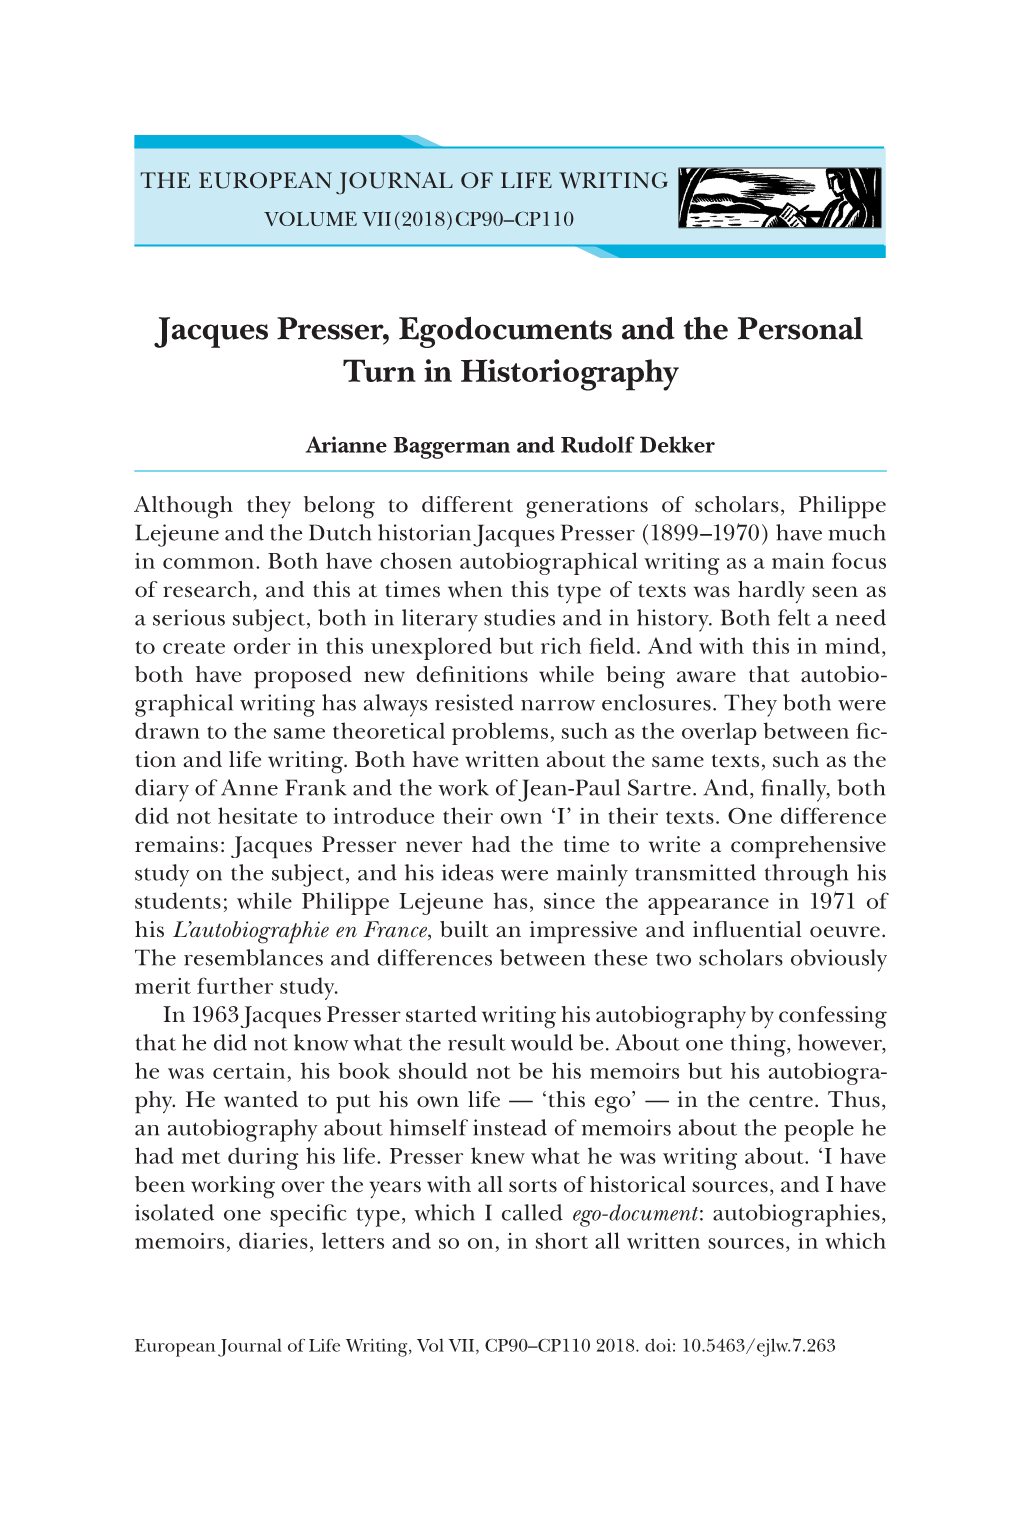 Jacques Presser, Egodocuments and the Personal Turn in Historiography